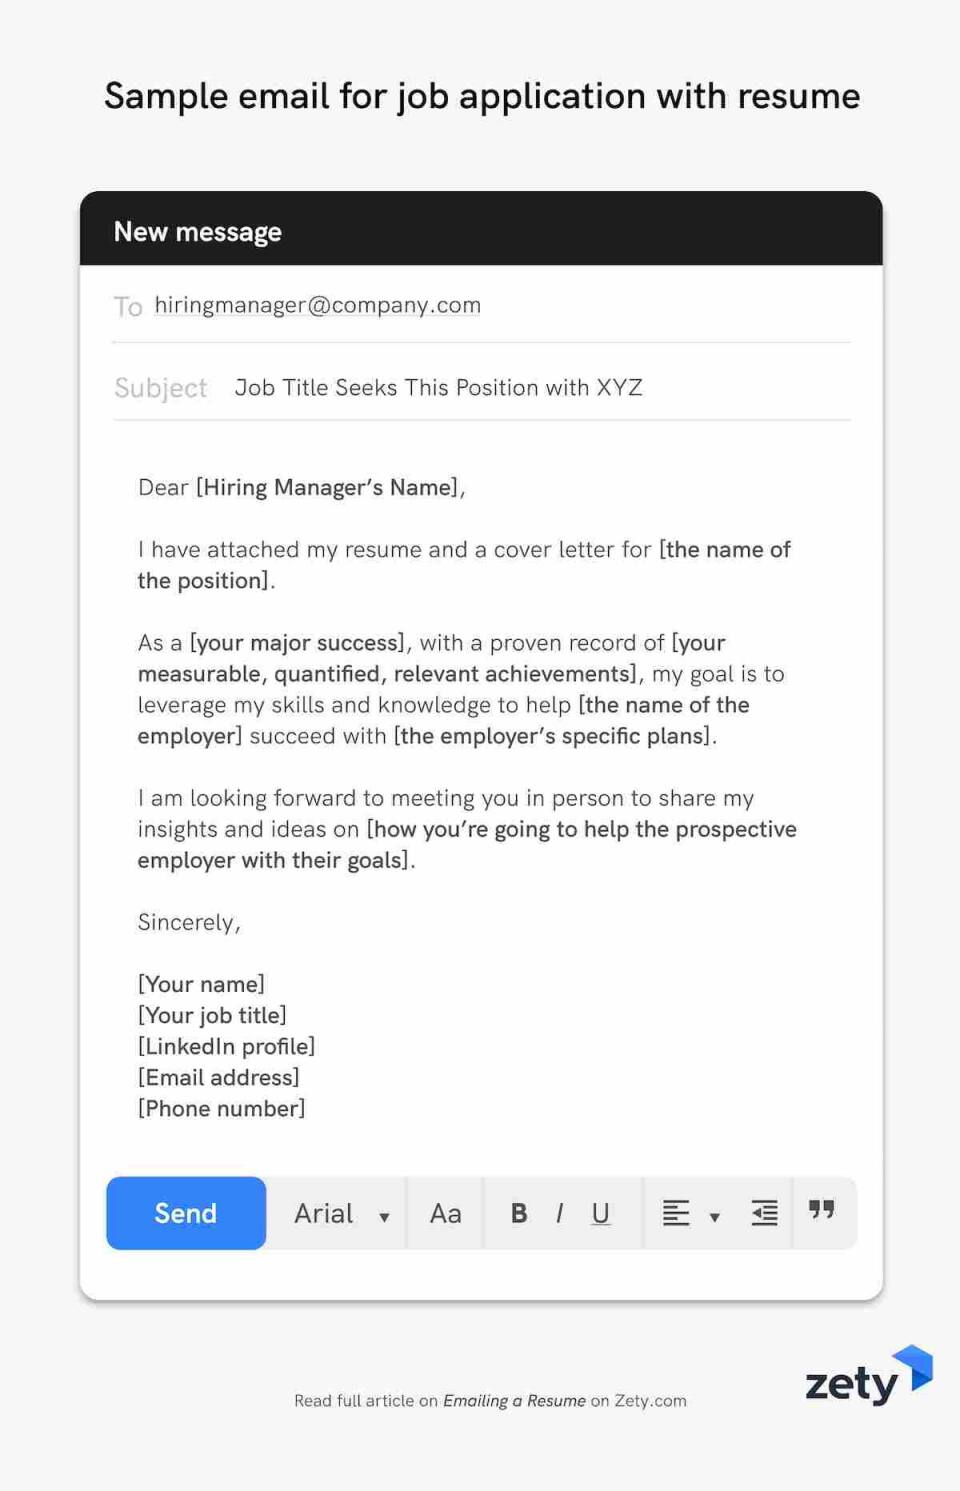 How to write a job application email